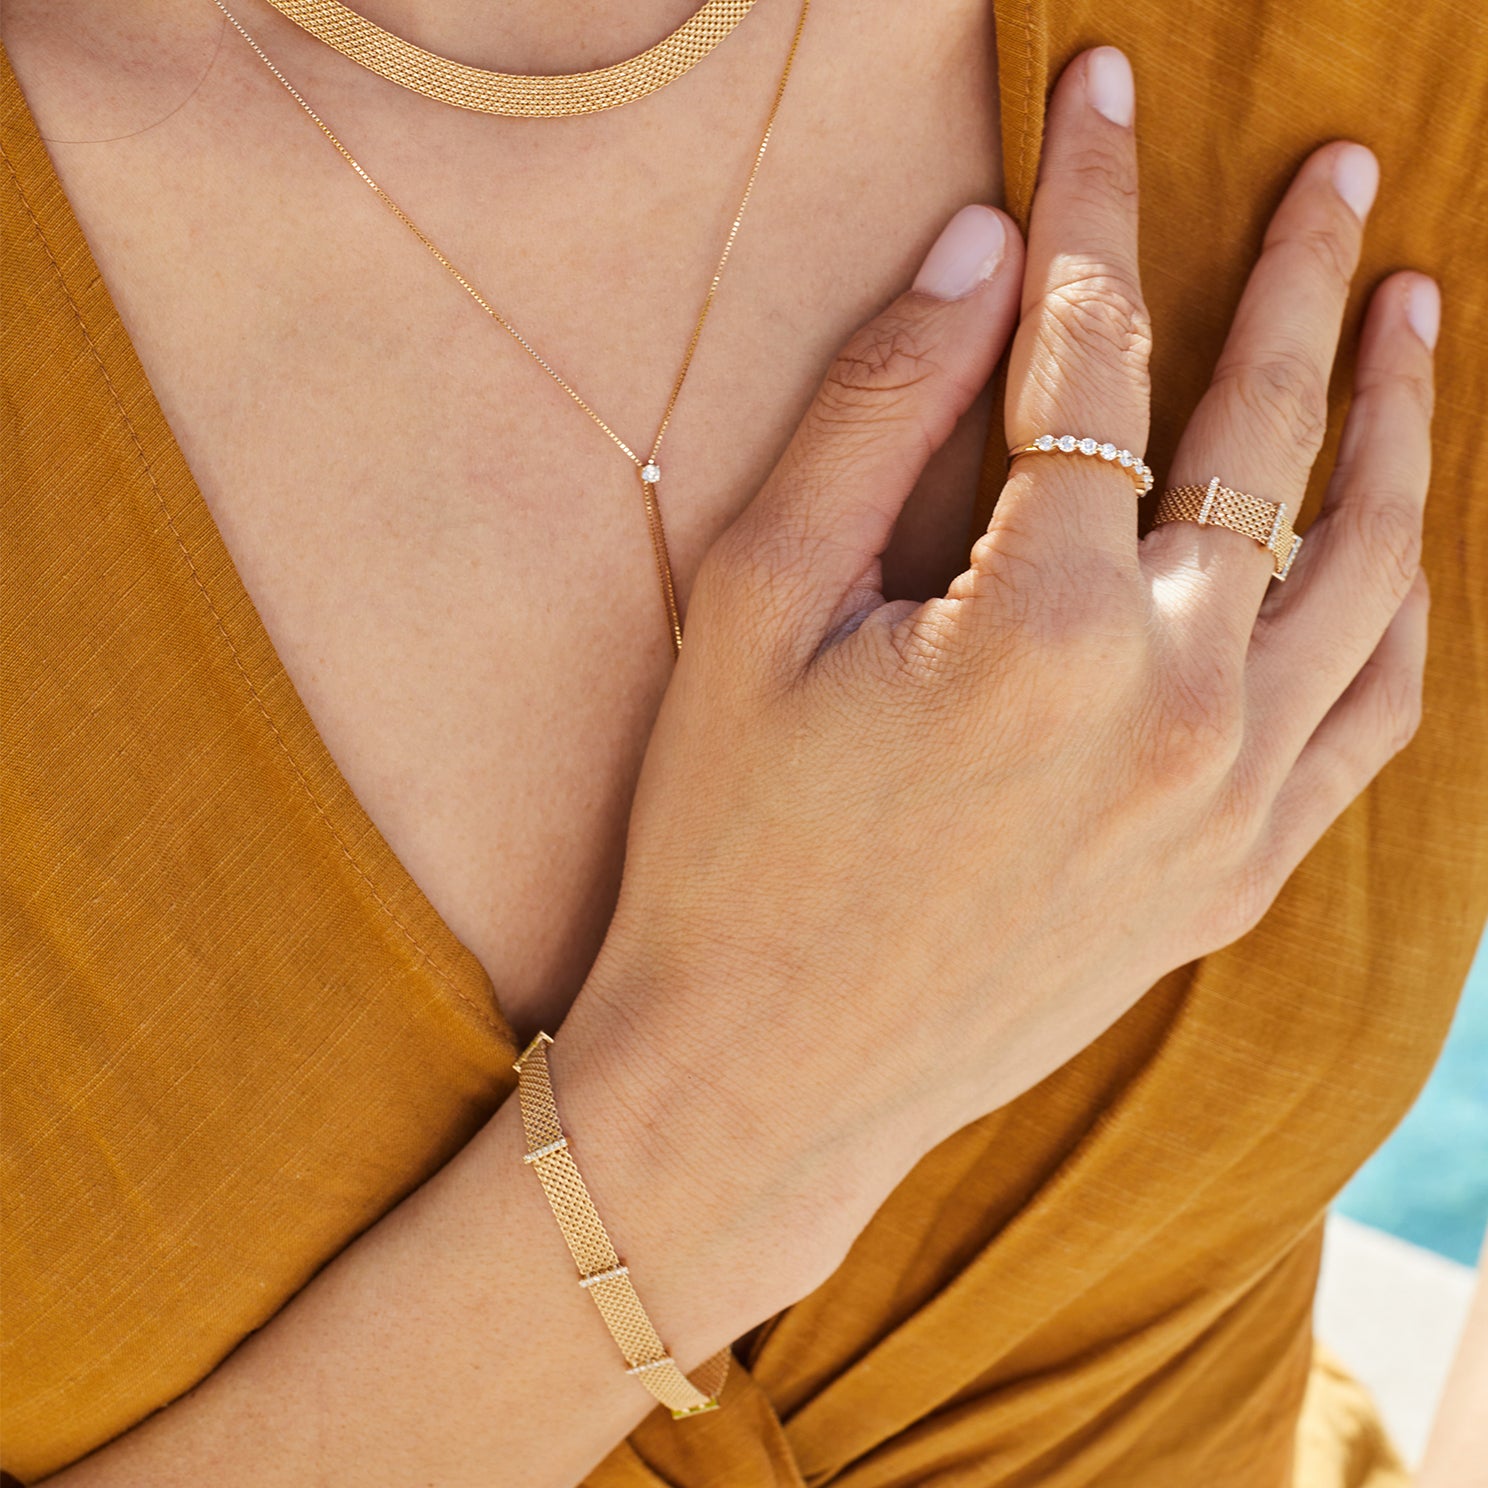 Diamond Bar Mesh Bracelet in 14k yellow gold styled on wrist of model and model wearing diamond rings and mustard yellow blouse